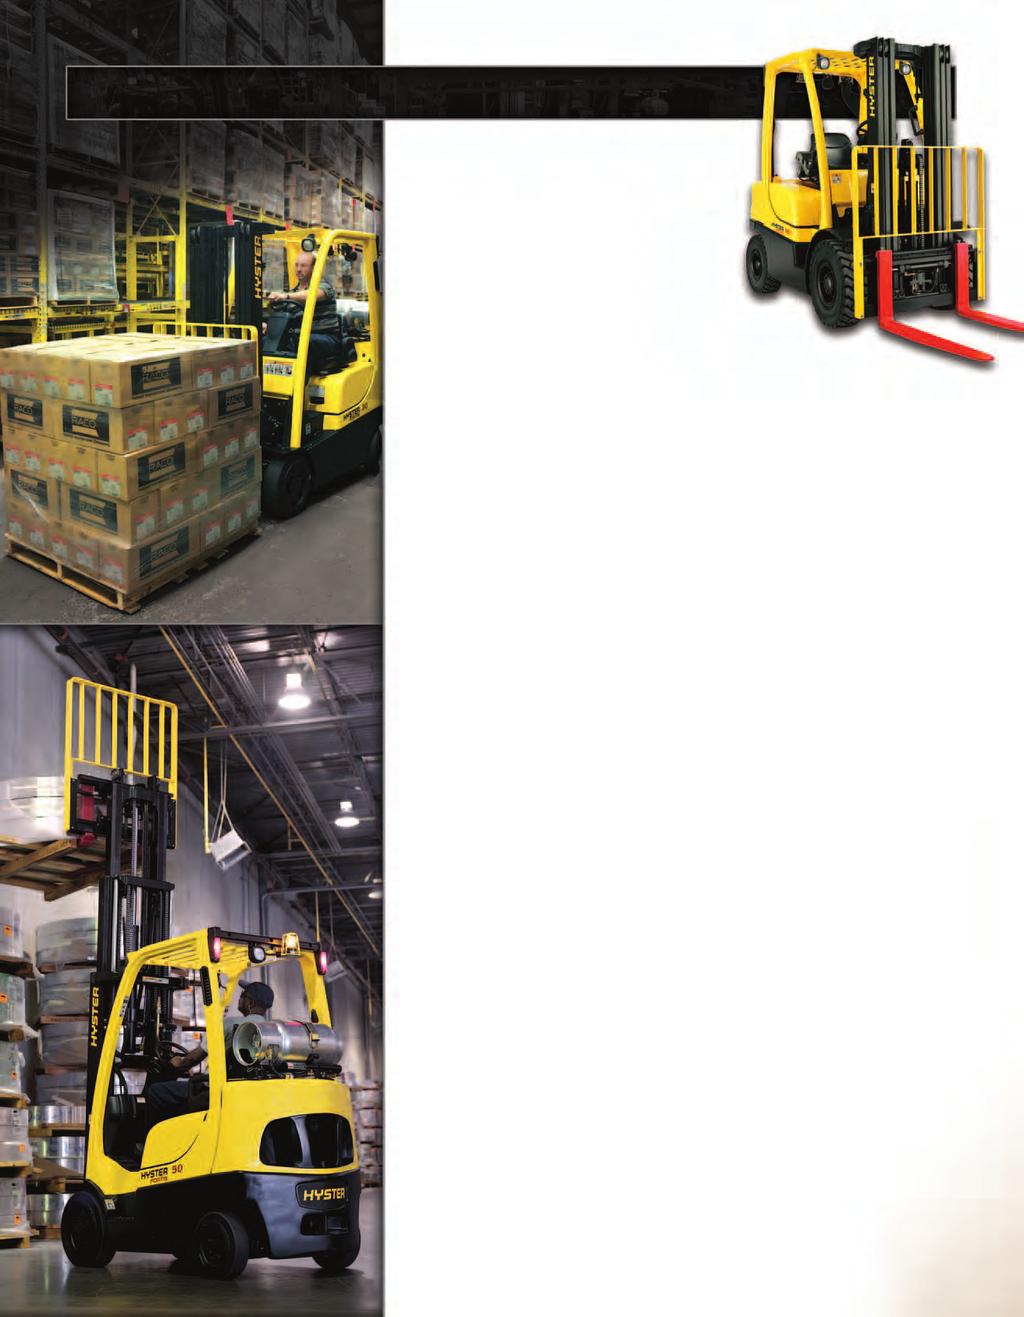 HYSTER TRUCK SERIES OPERATION SAVE OVER $2,200 IN OPERATING COSTS PER LIFT TRUCK EACH YEAR Lowering operating costs in all types of applications is what the Hyster Fortis series does best.